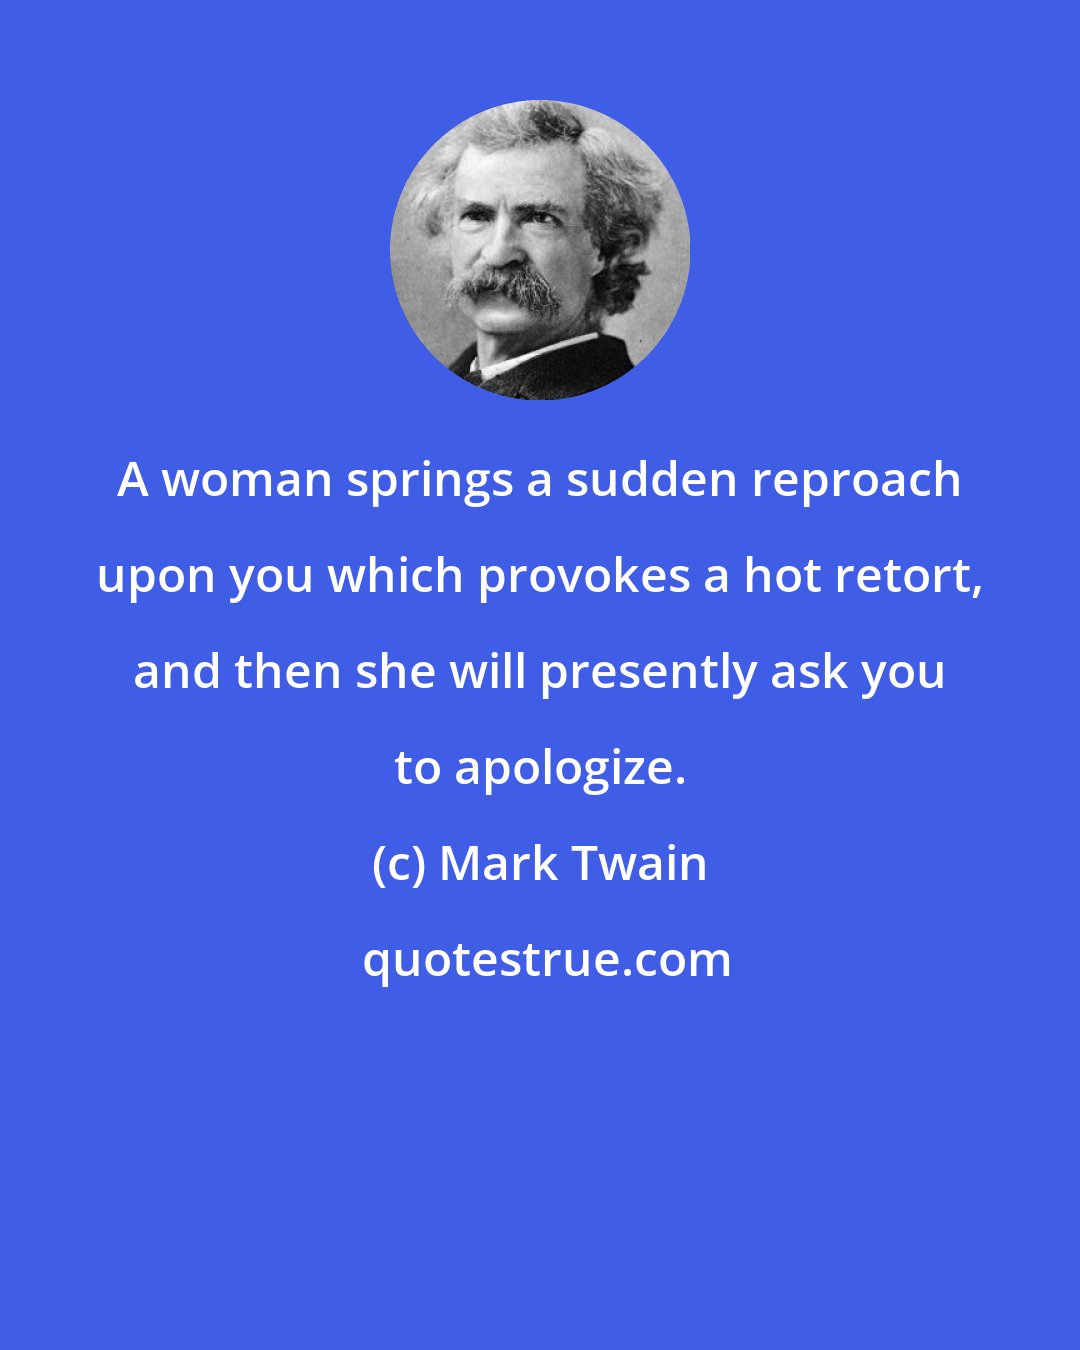 Mark Twain: A woman springs a sudden reproach upon you which provokes a hot retort, and then she will presently ask you to apologize.